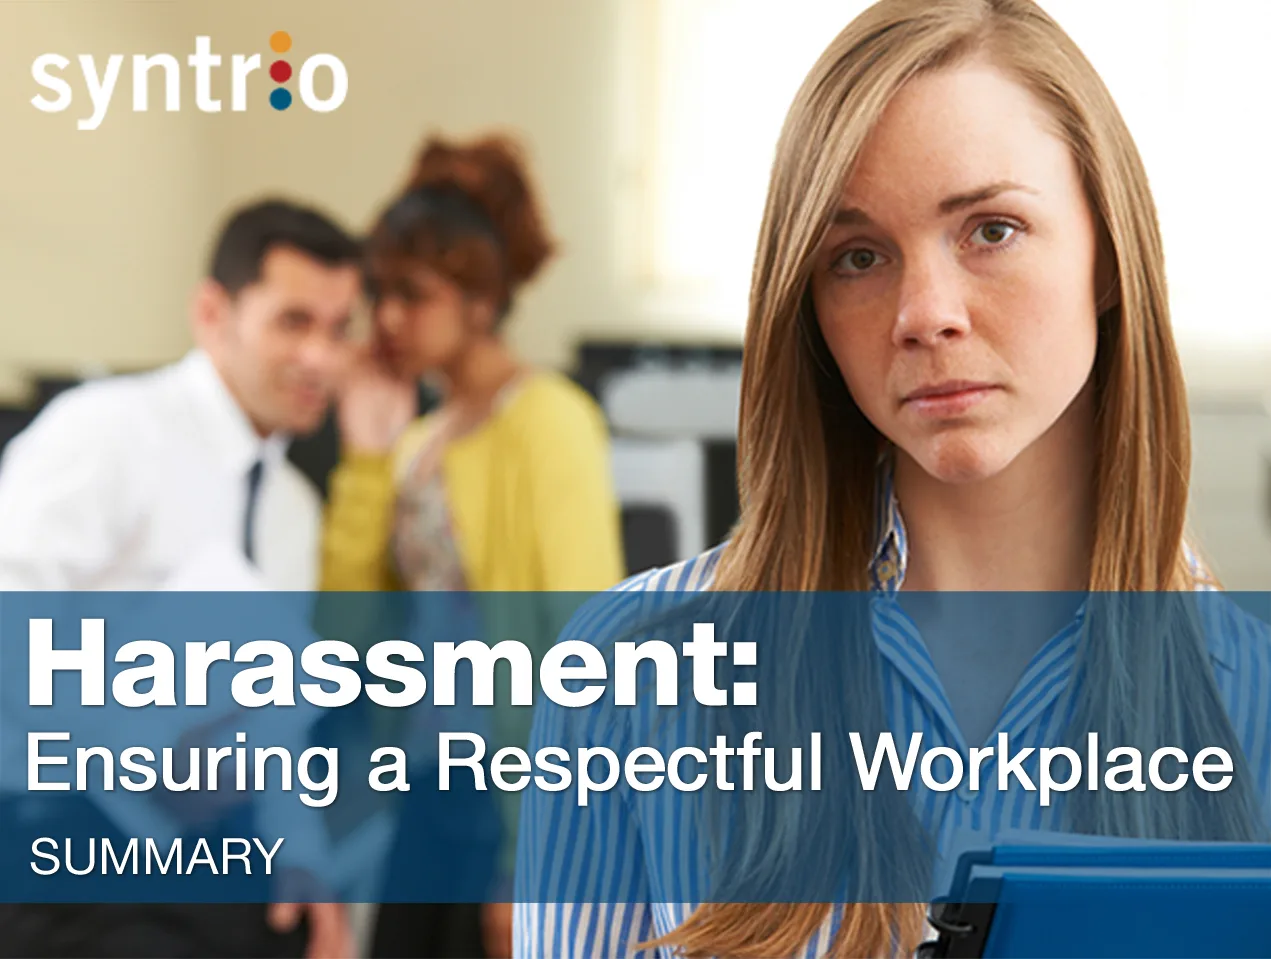 Syntrio - Harassment: Ensuring a Respectful Workplace (Summary)